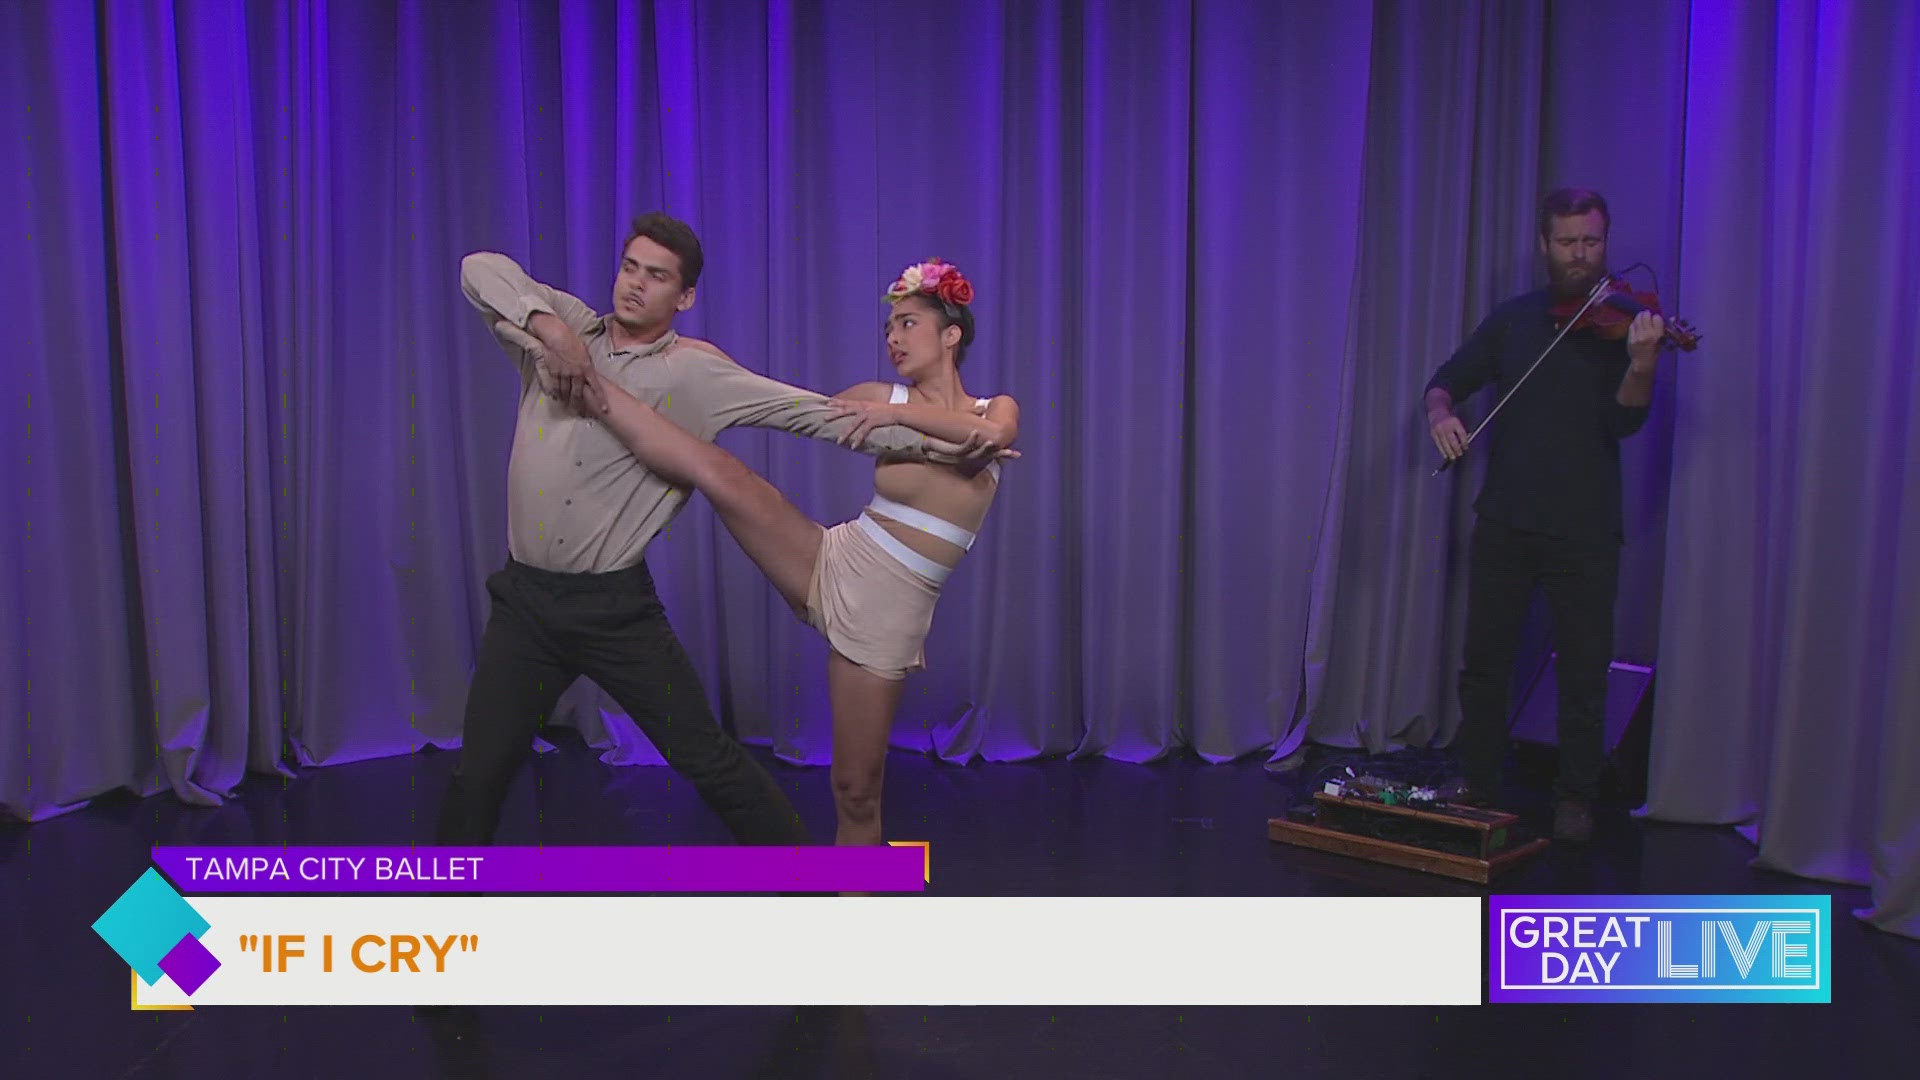 Dancers from Tampa City Ballet join us with a preview of their latest production, "If I Cry."  For tickets visit tampacityballet.org.